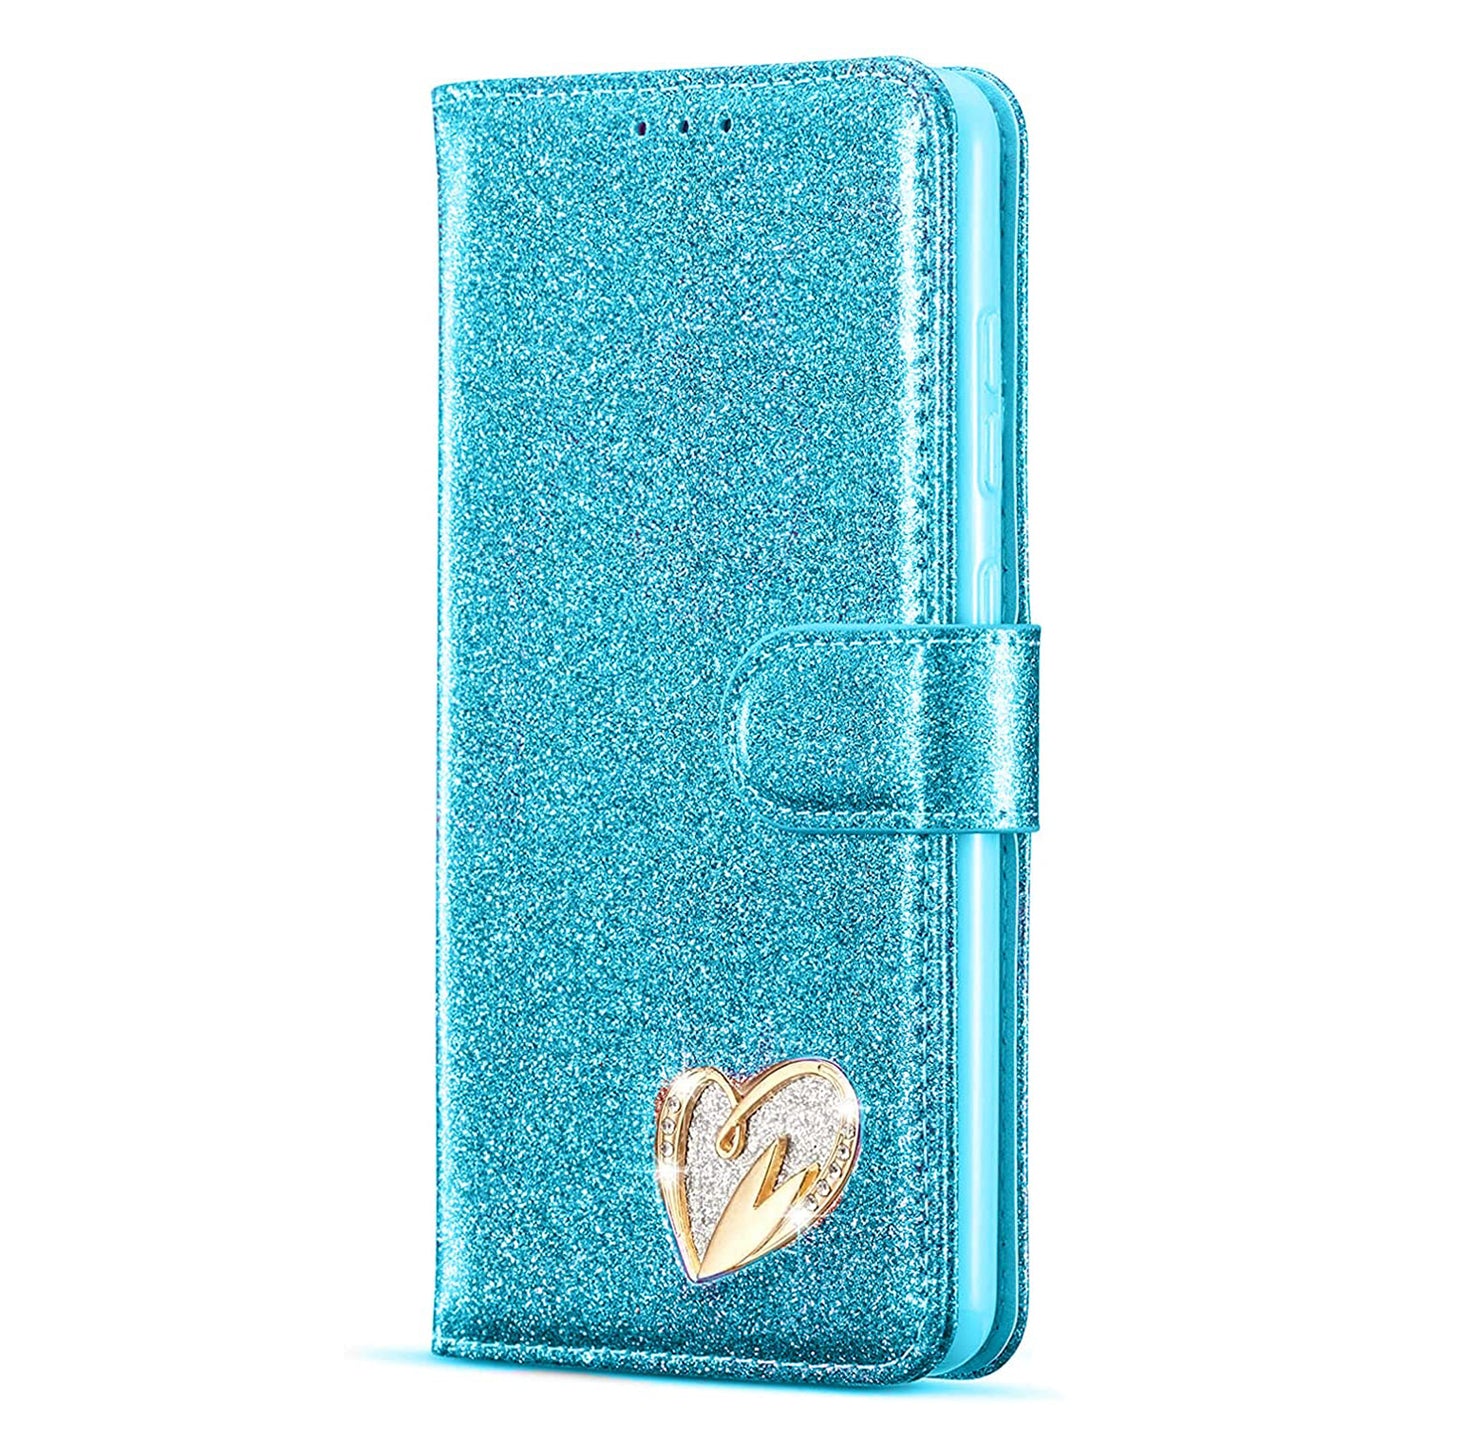 Shiny Leather Glitter Wallet Flip Case with Card Slots for iPhone